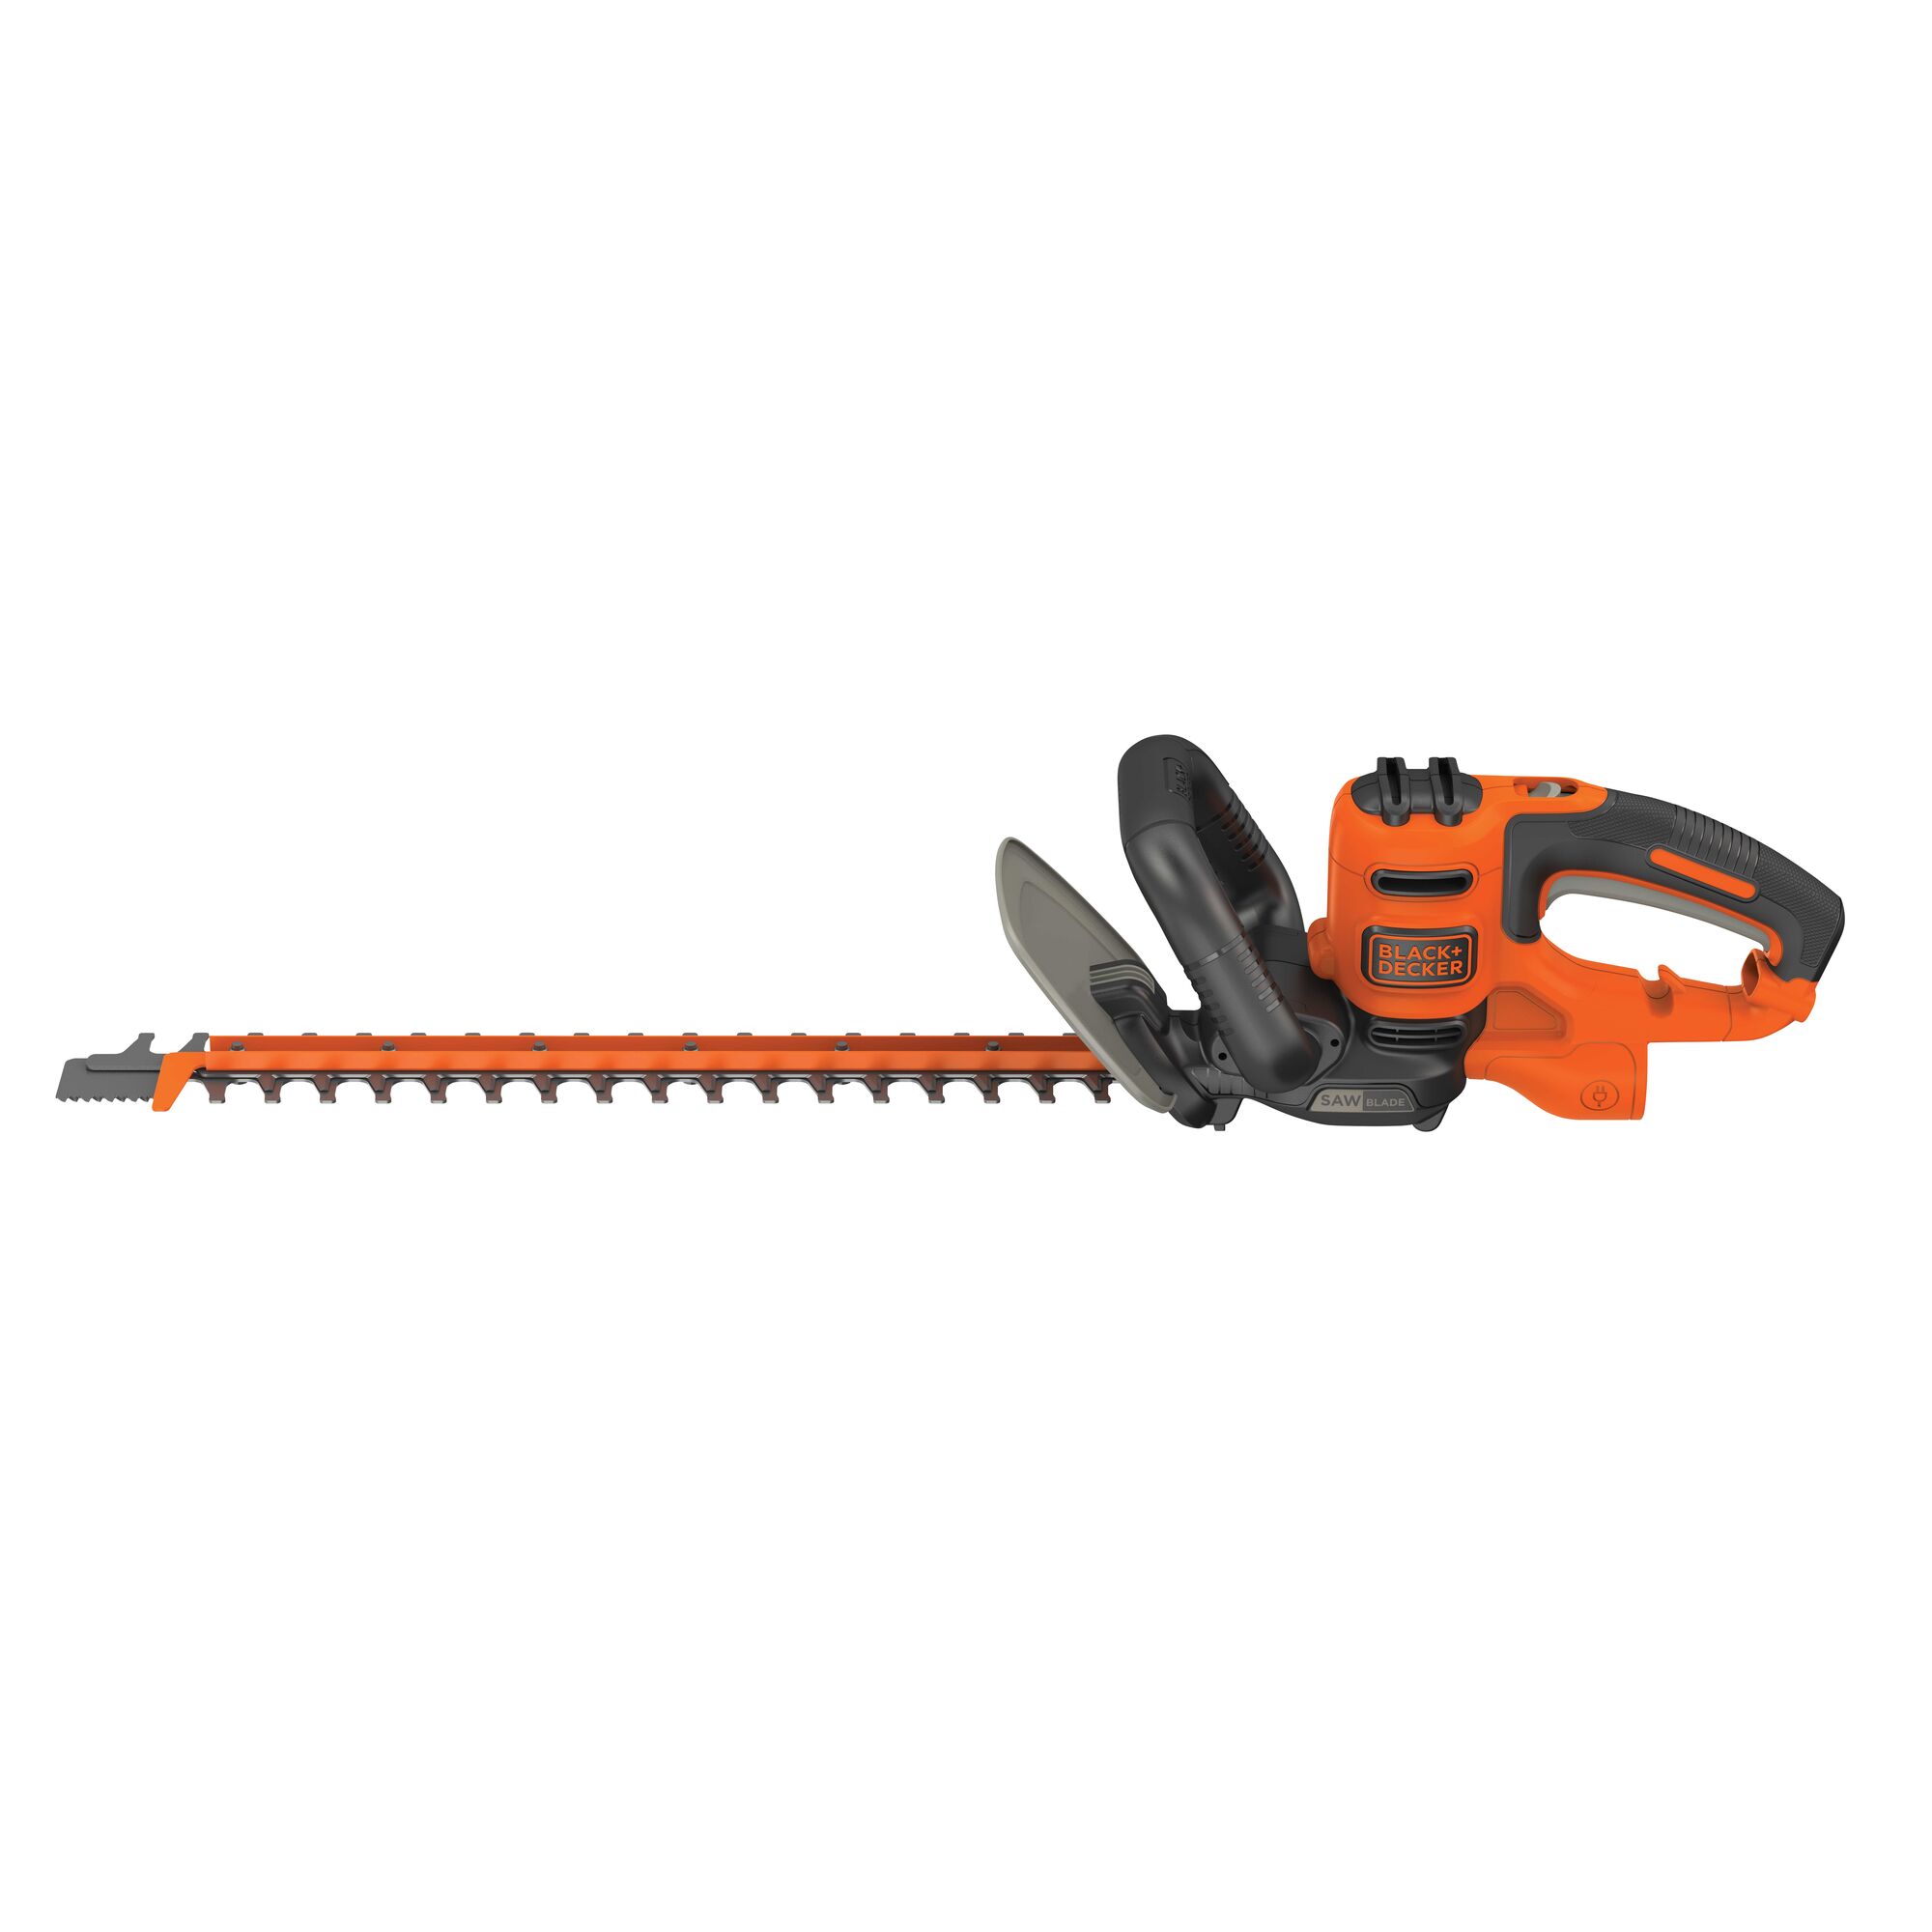 20 inch SAW BLADE Electric Hedge Trimmer.